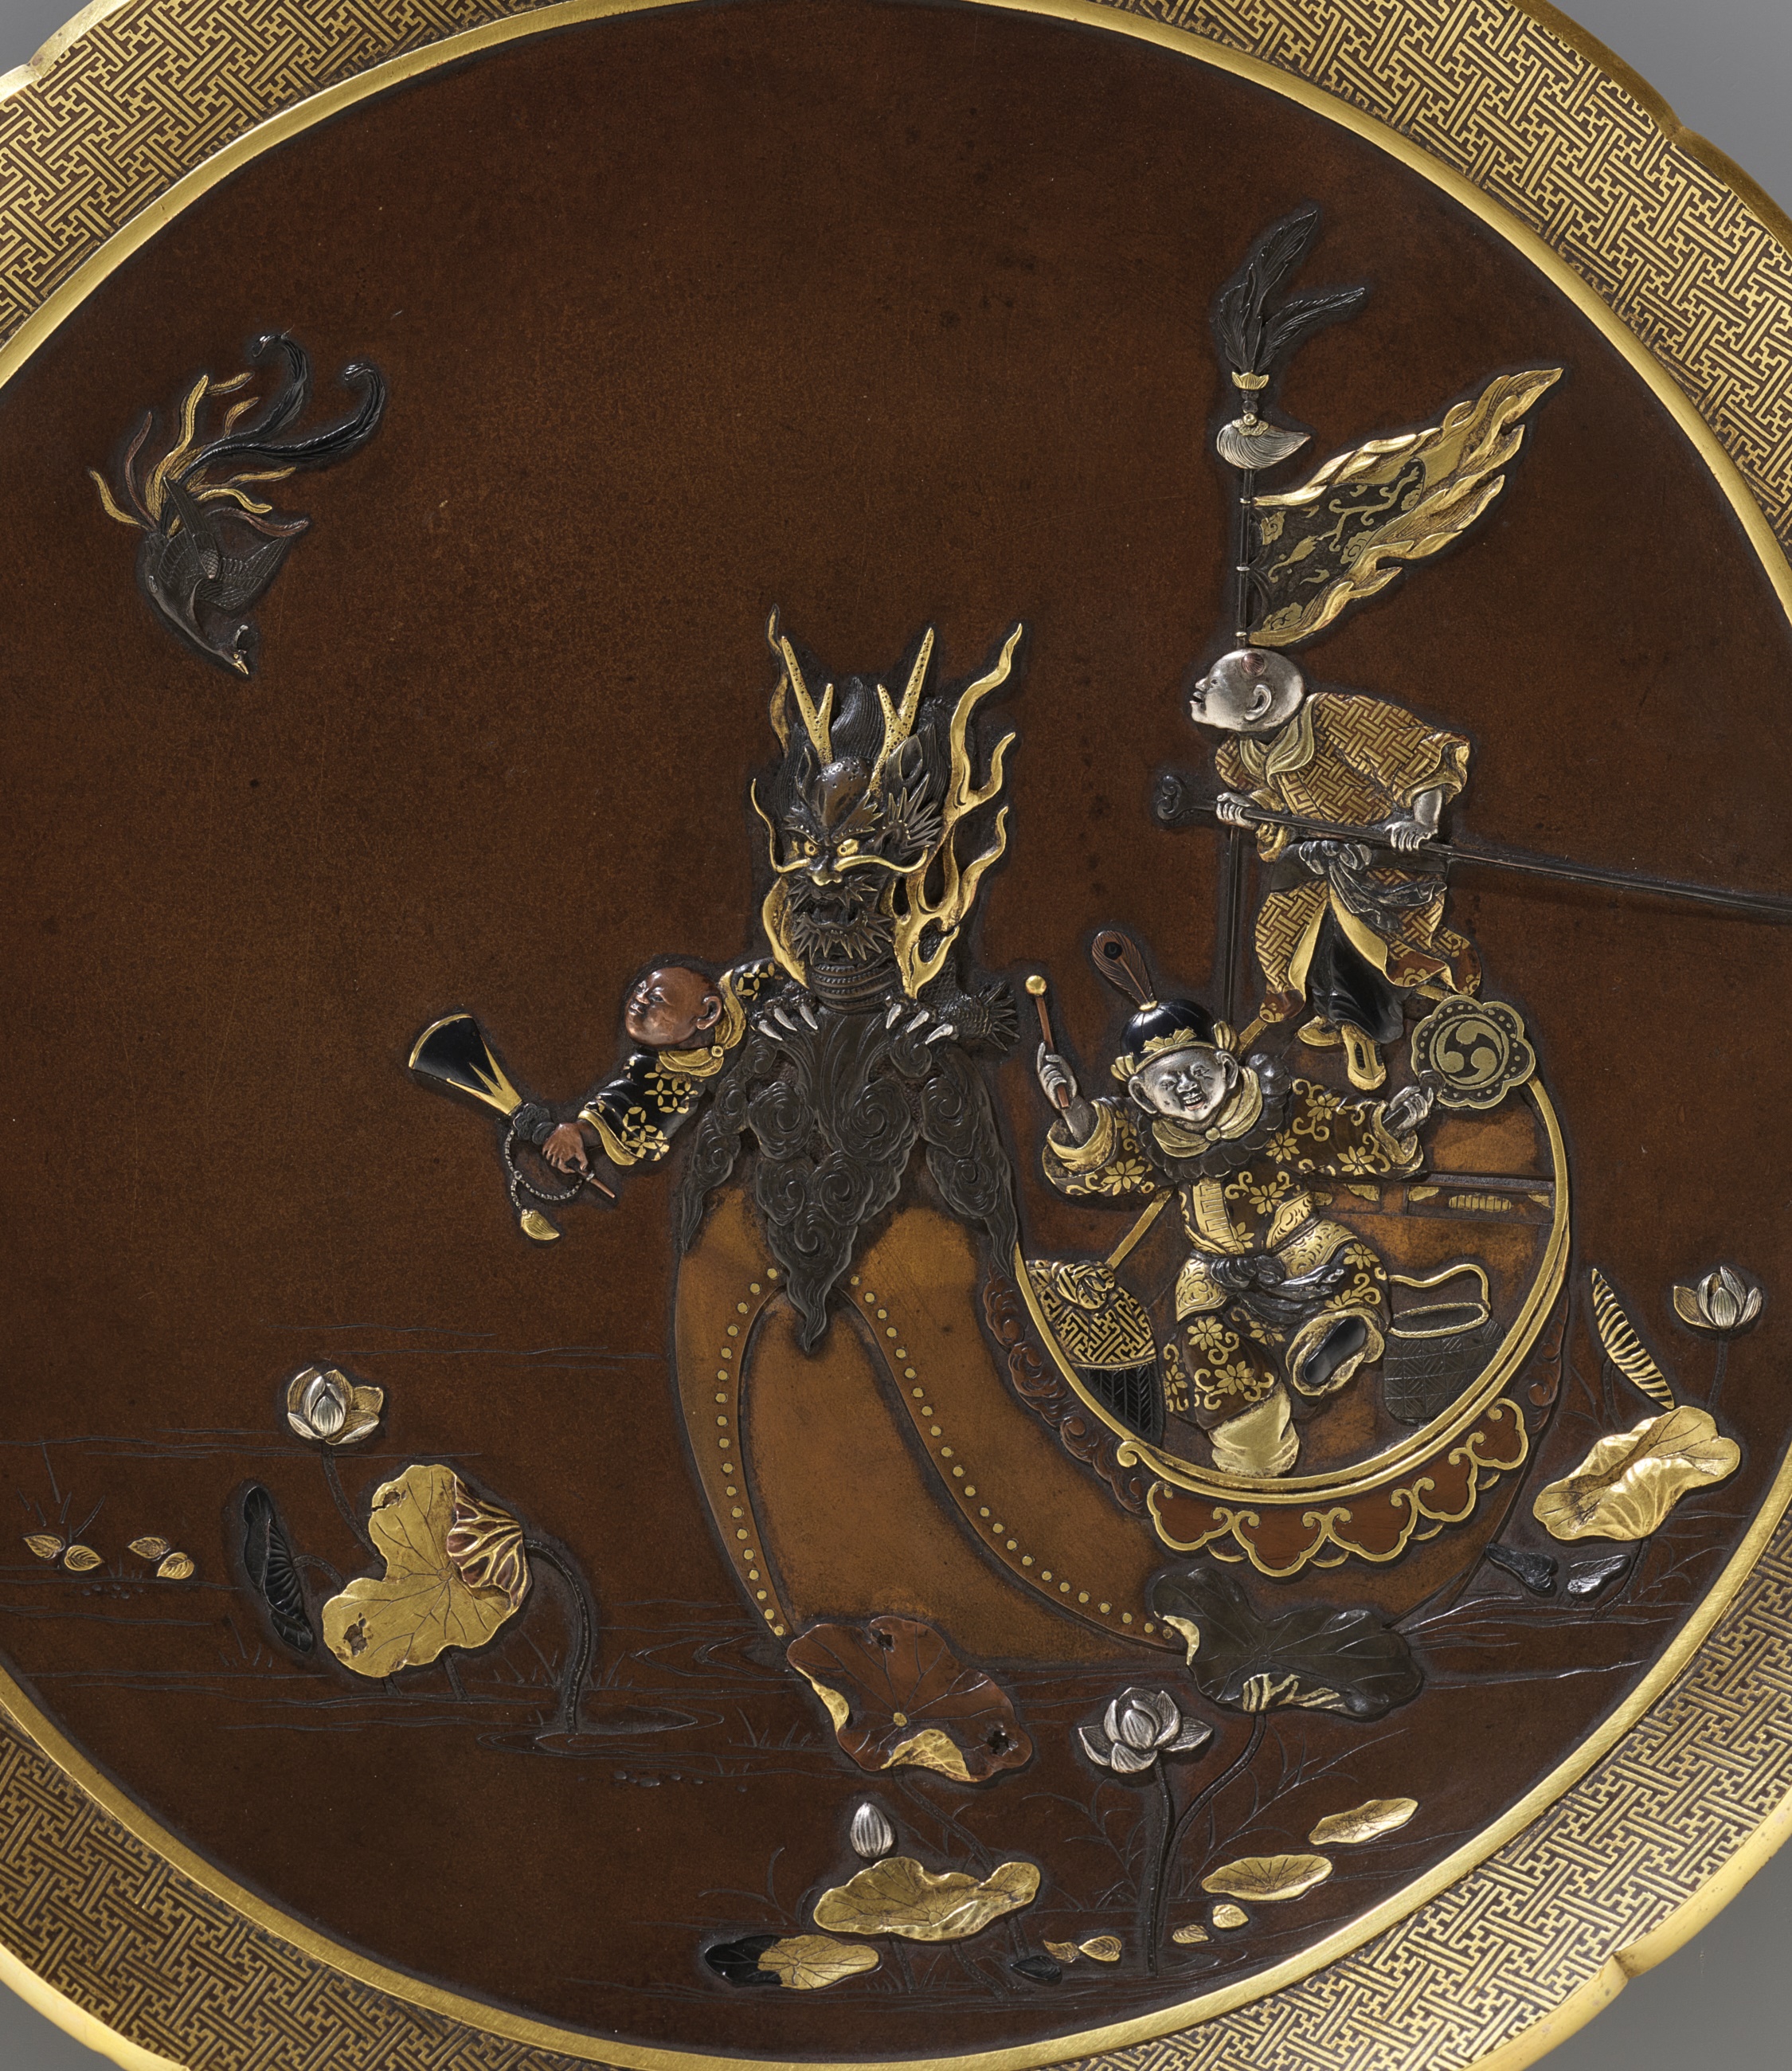 INOUE: A SUPERB INLAID BRONZE DISH DEPICTING BOYS ON A DRAGON BOAT